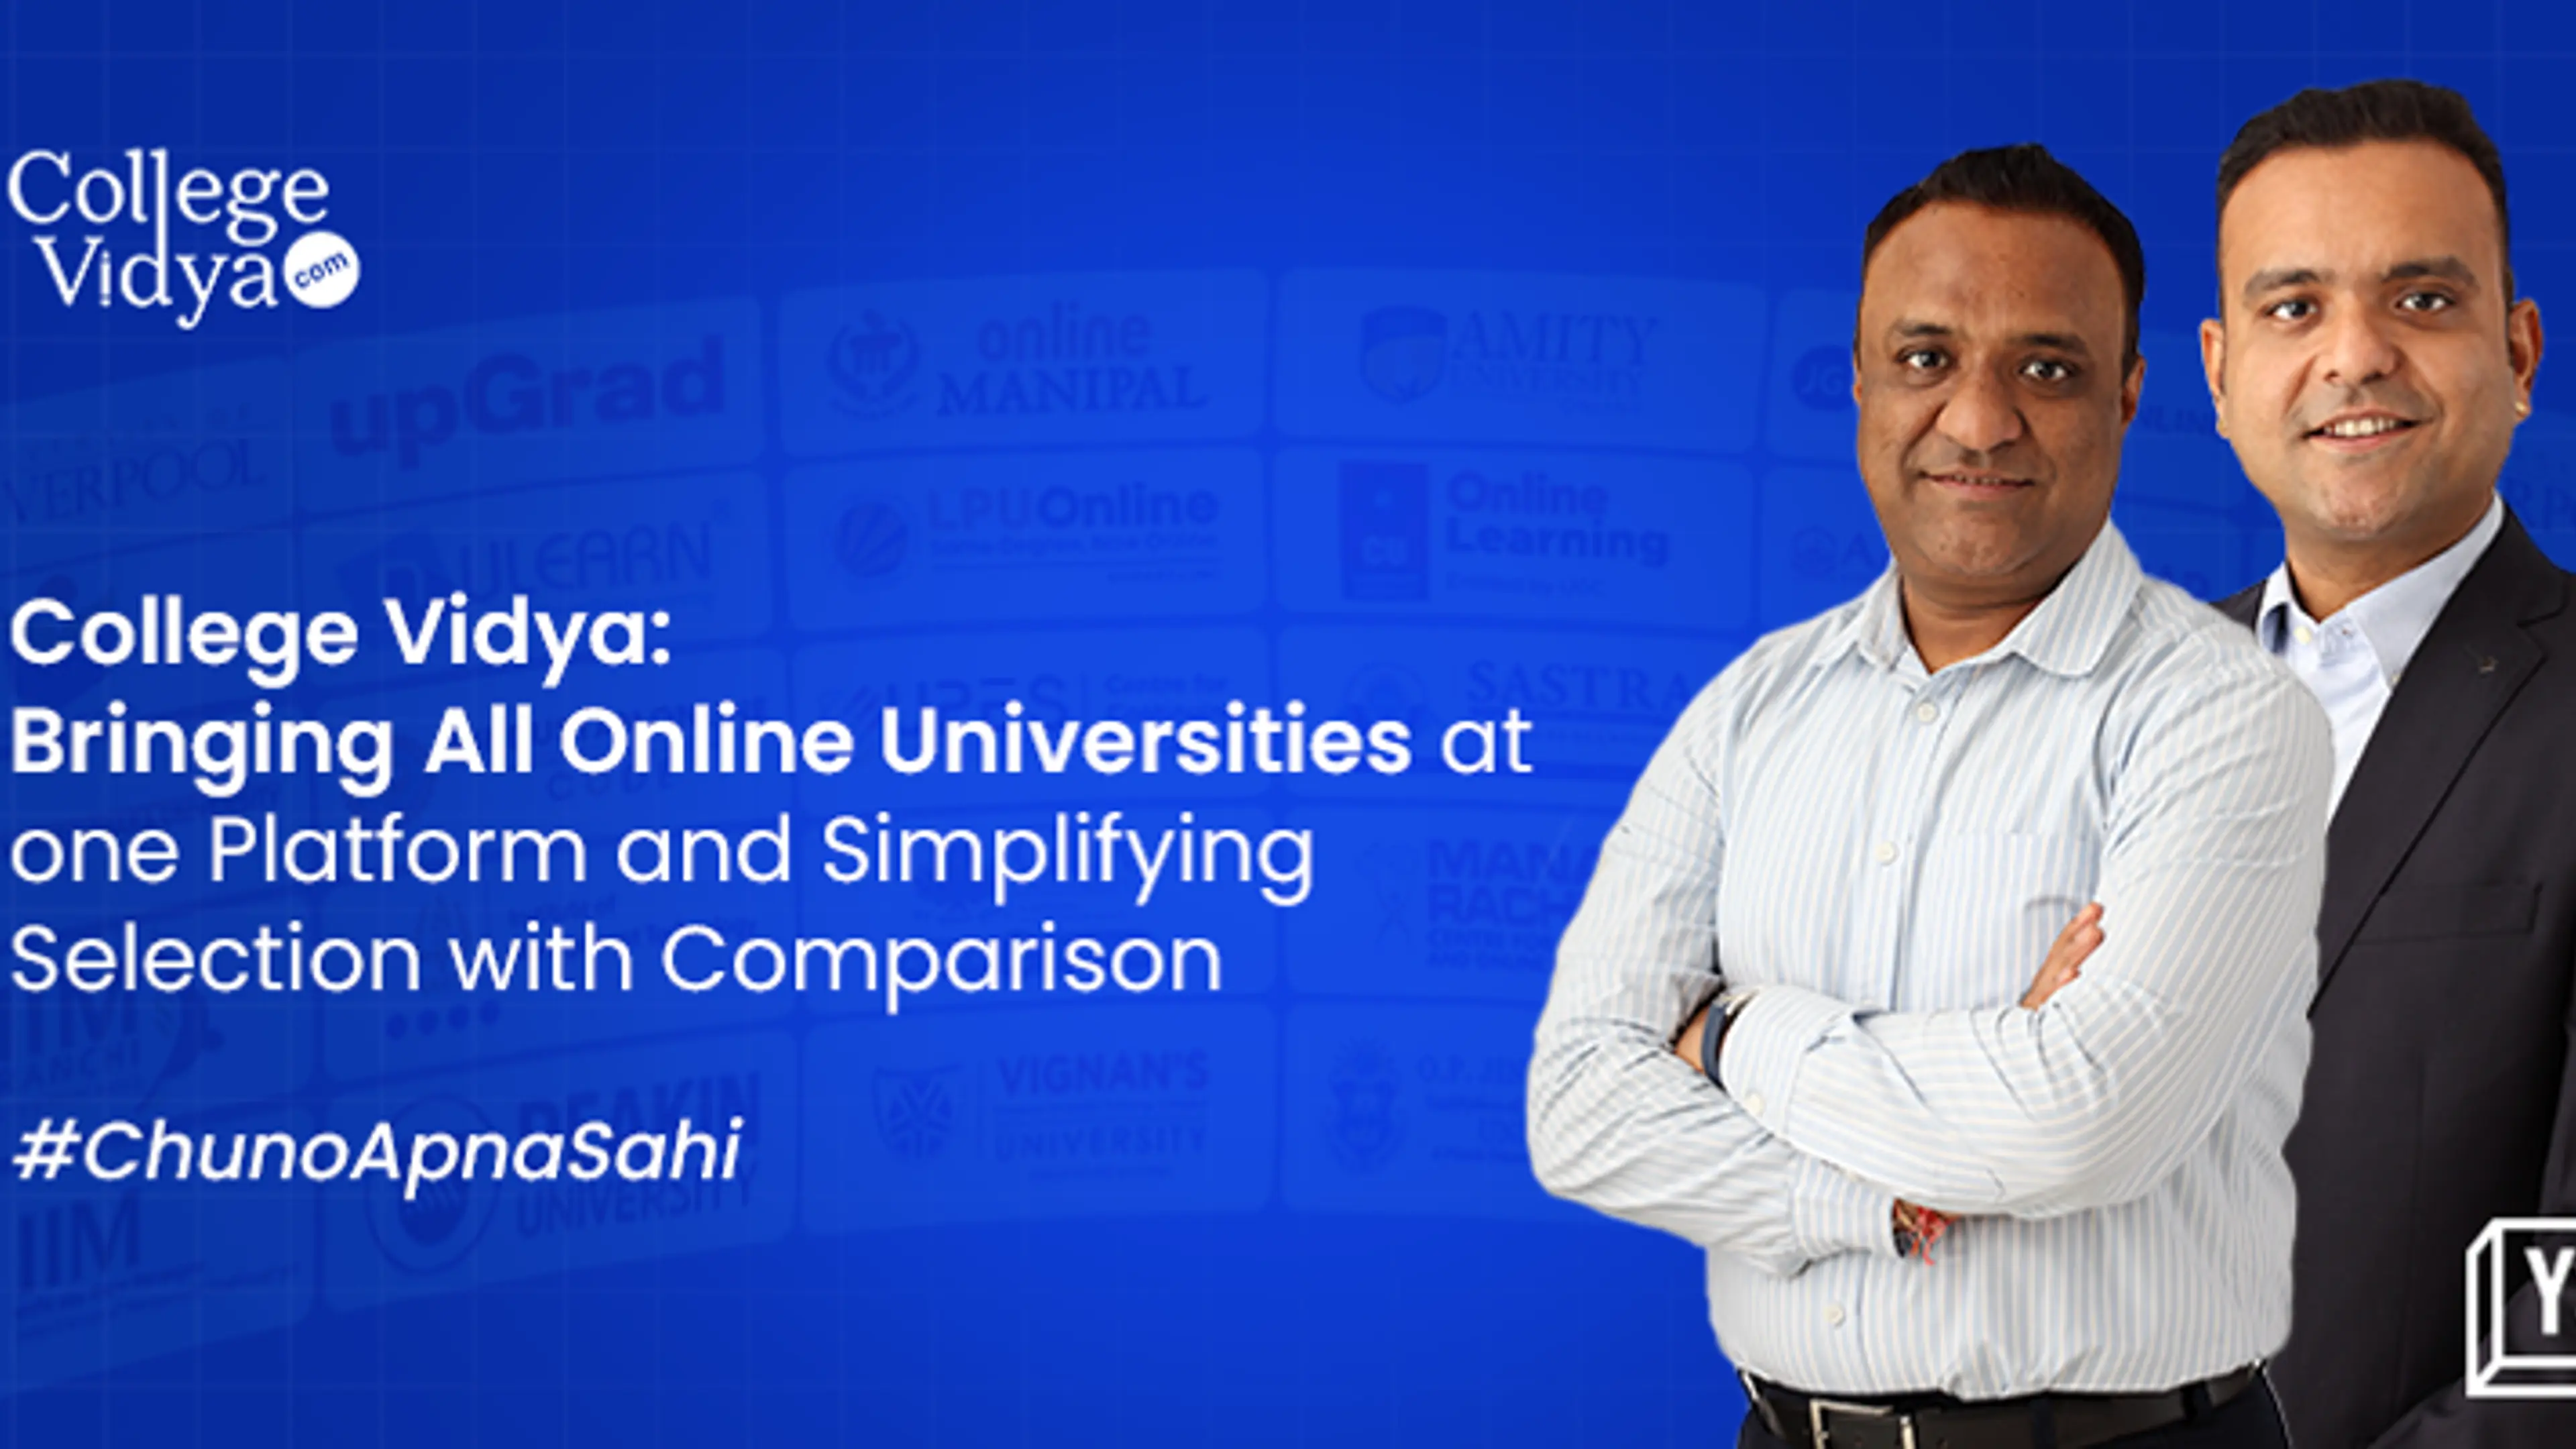 Here's how College Vidya is building the Amazon of online education